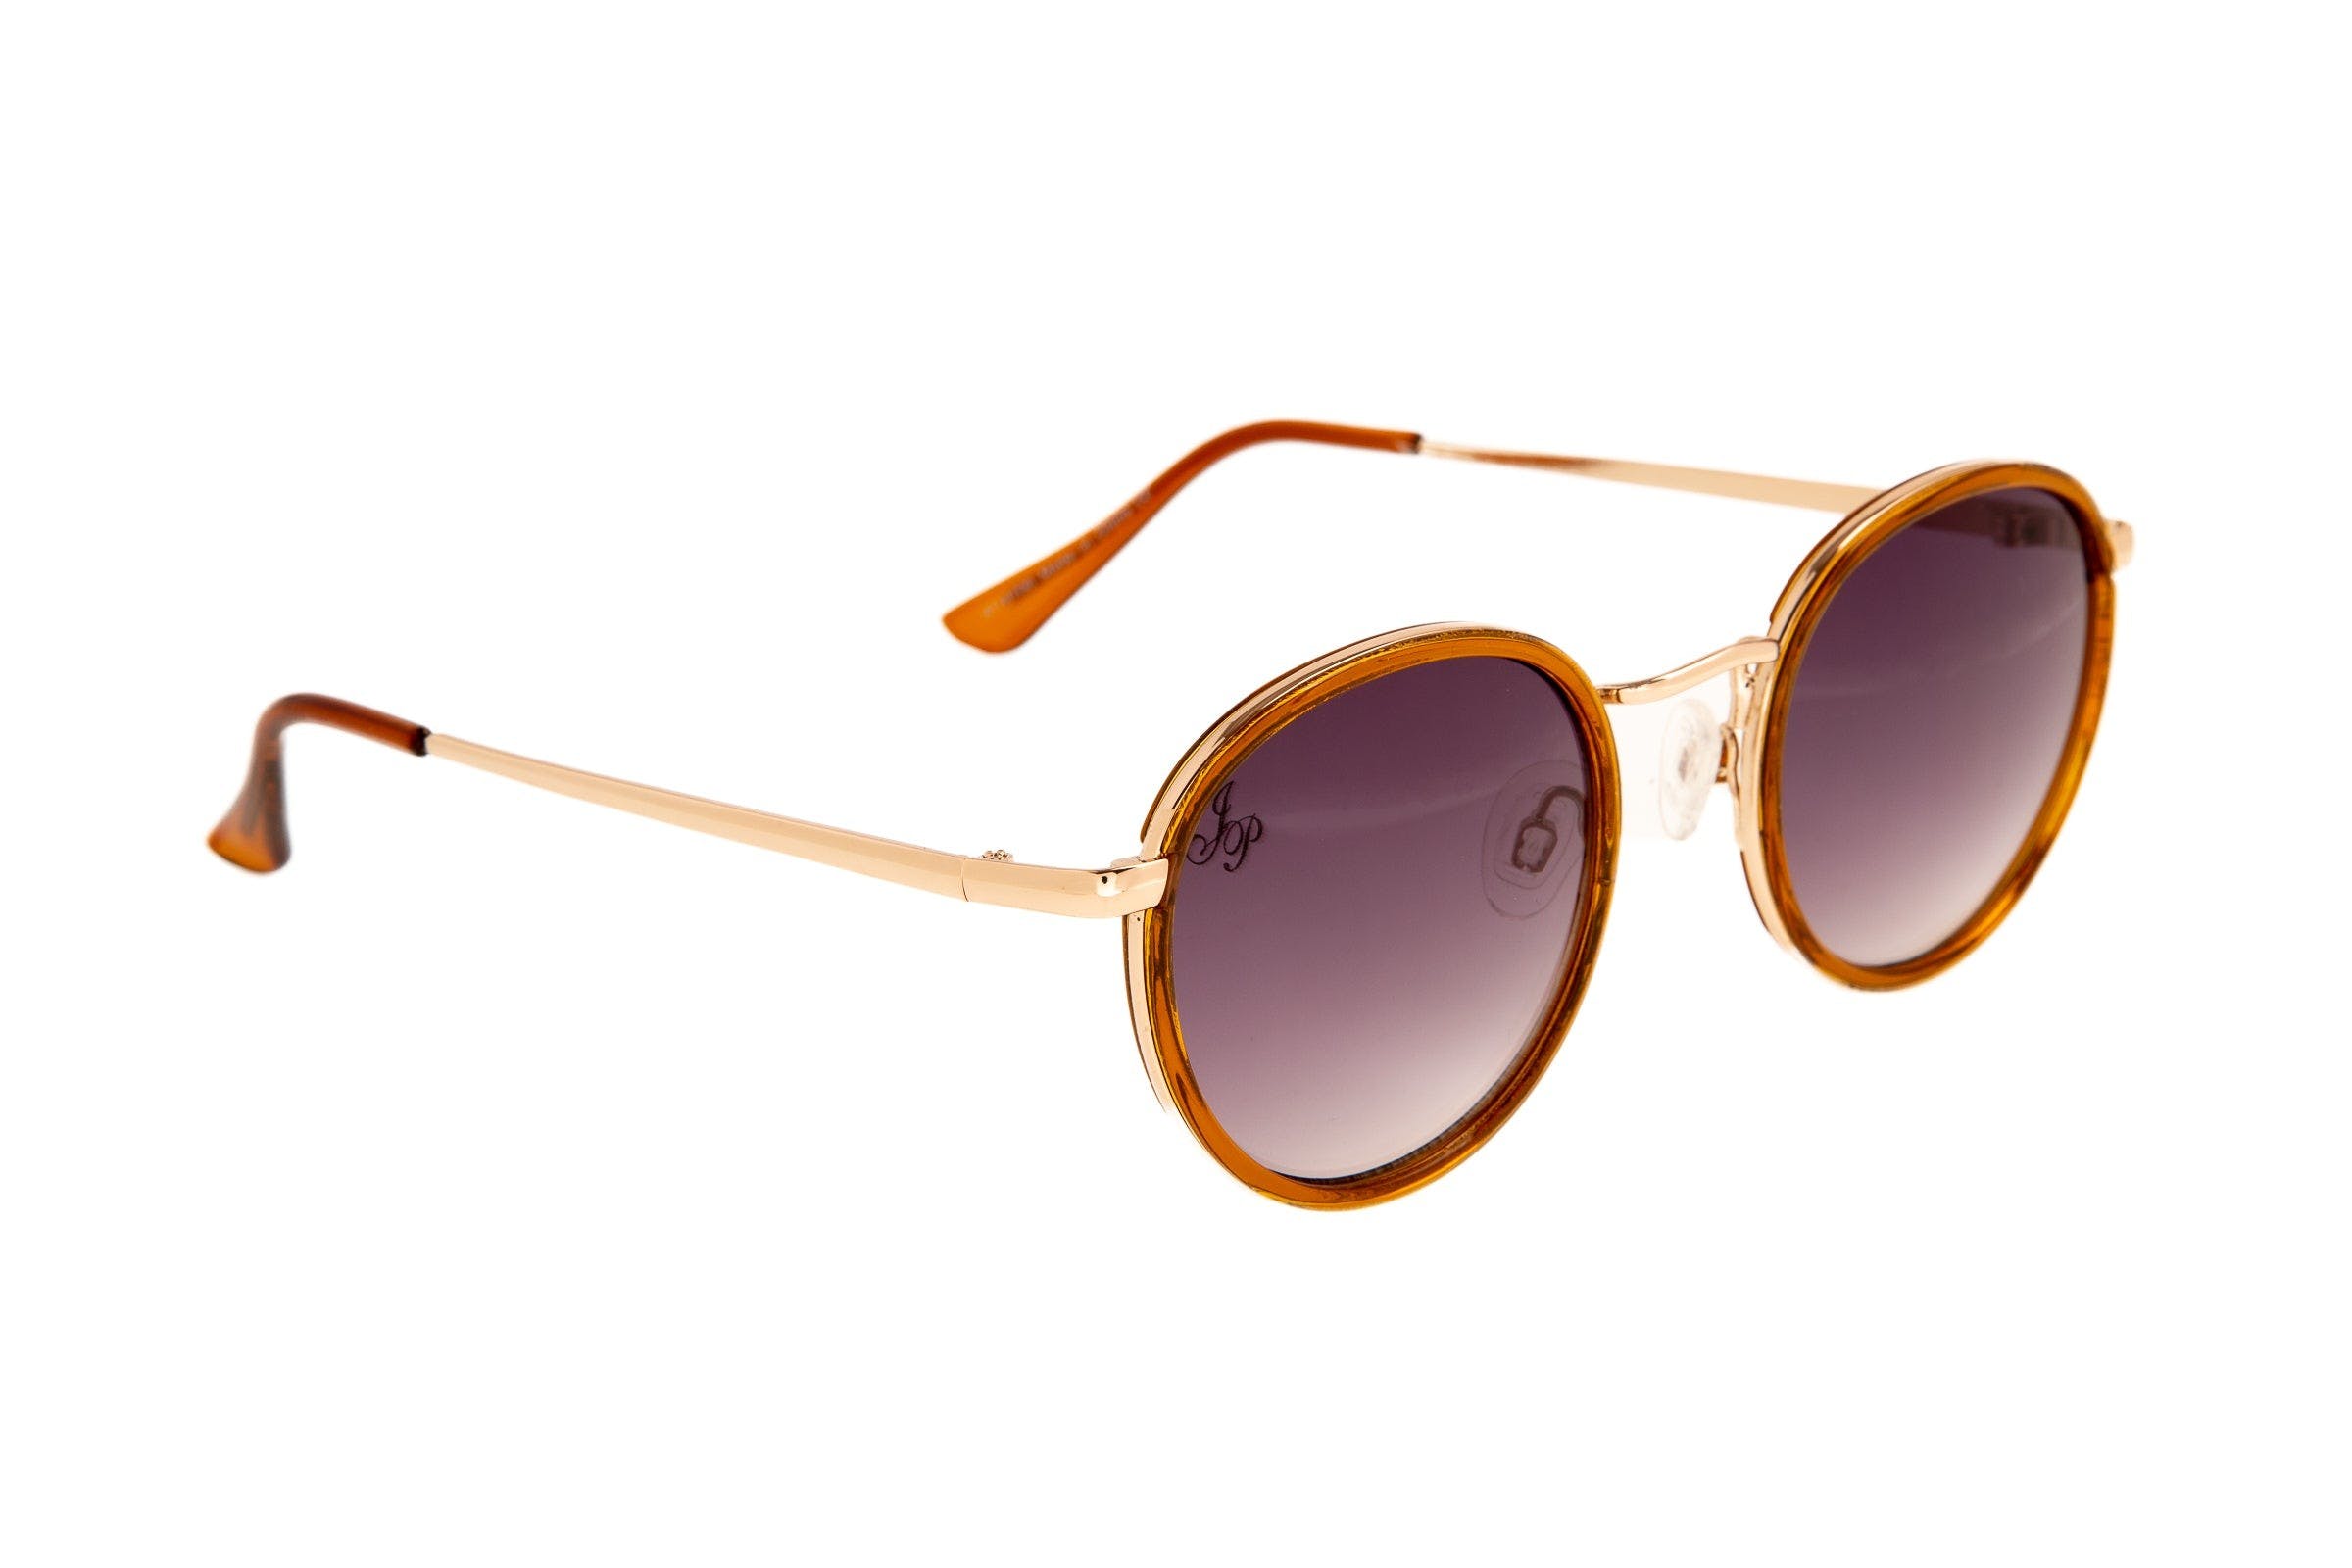 CLASSIC ROUND STYLE SUNGLASSES WITH BROWN FRAMES